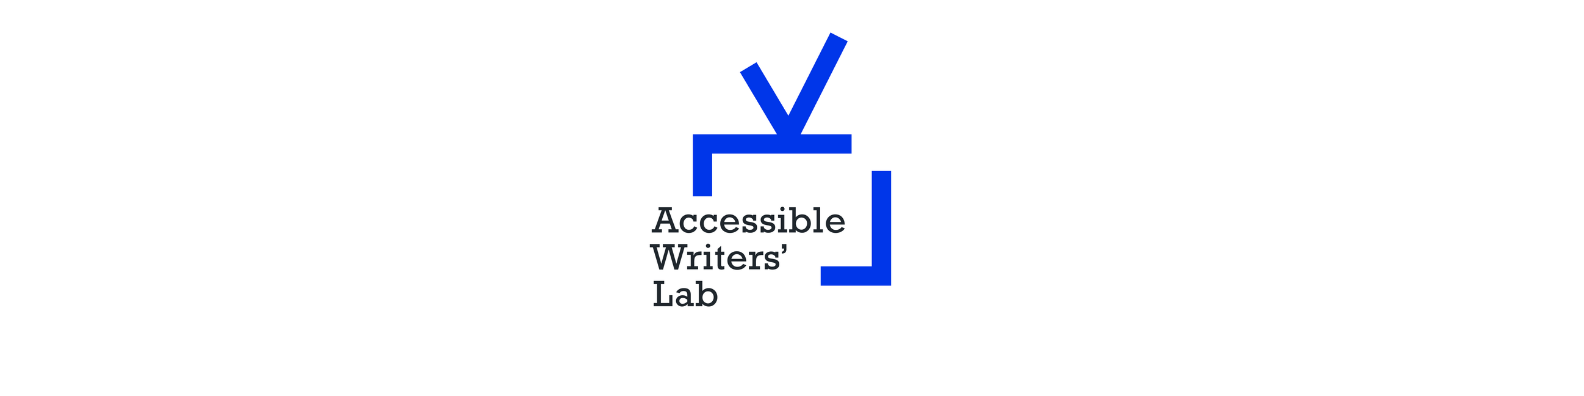 Accessible Writers Lab logo.